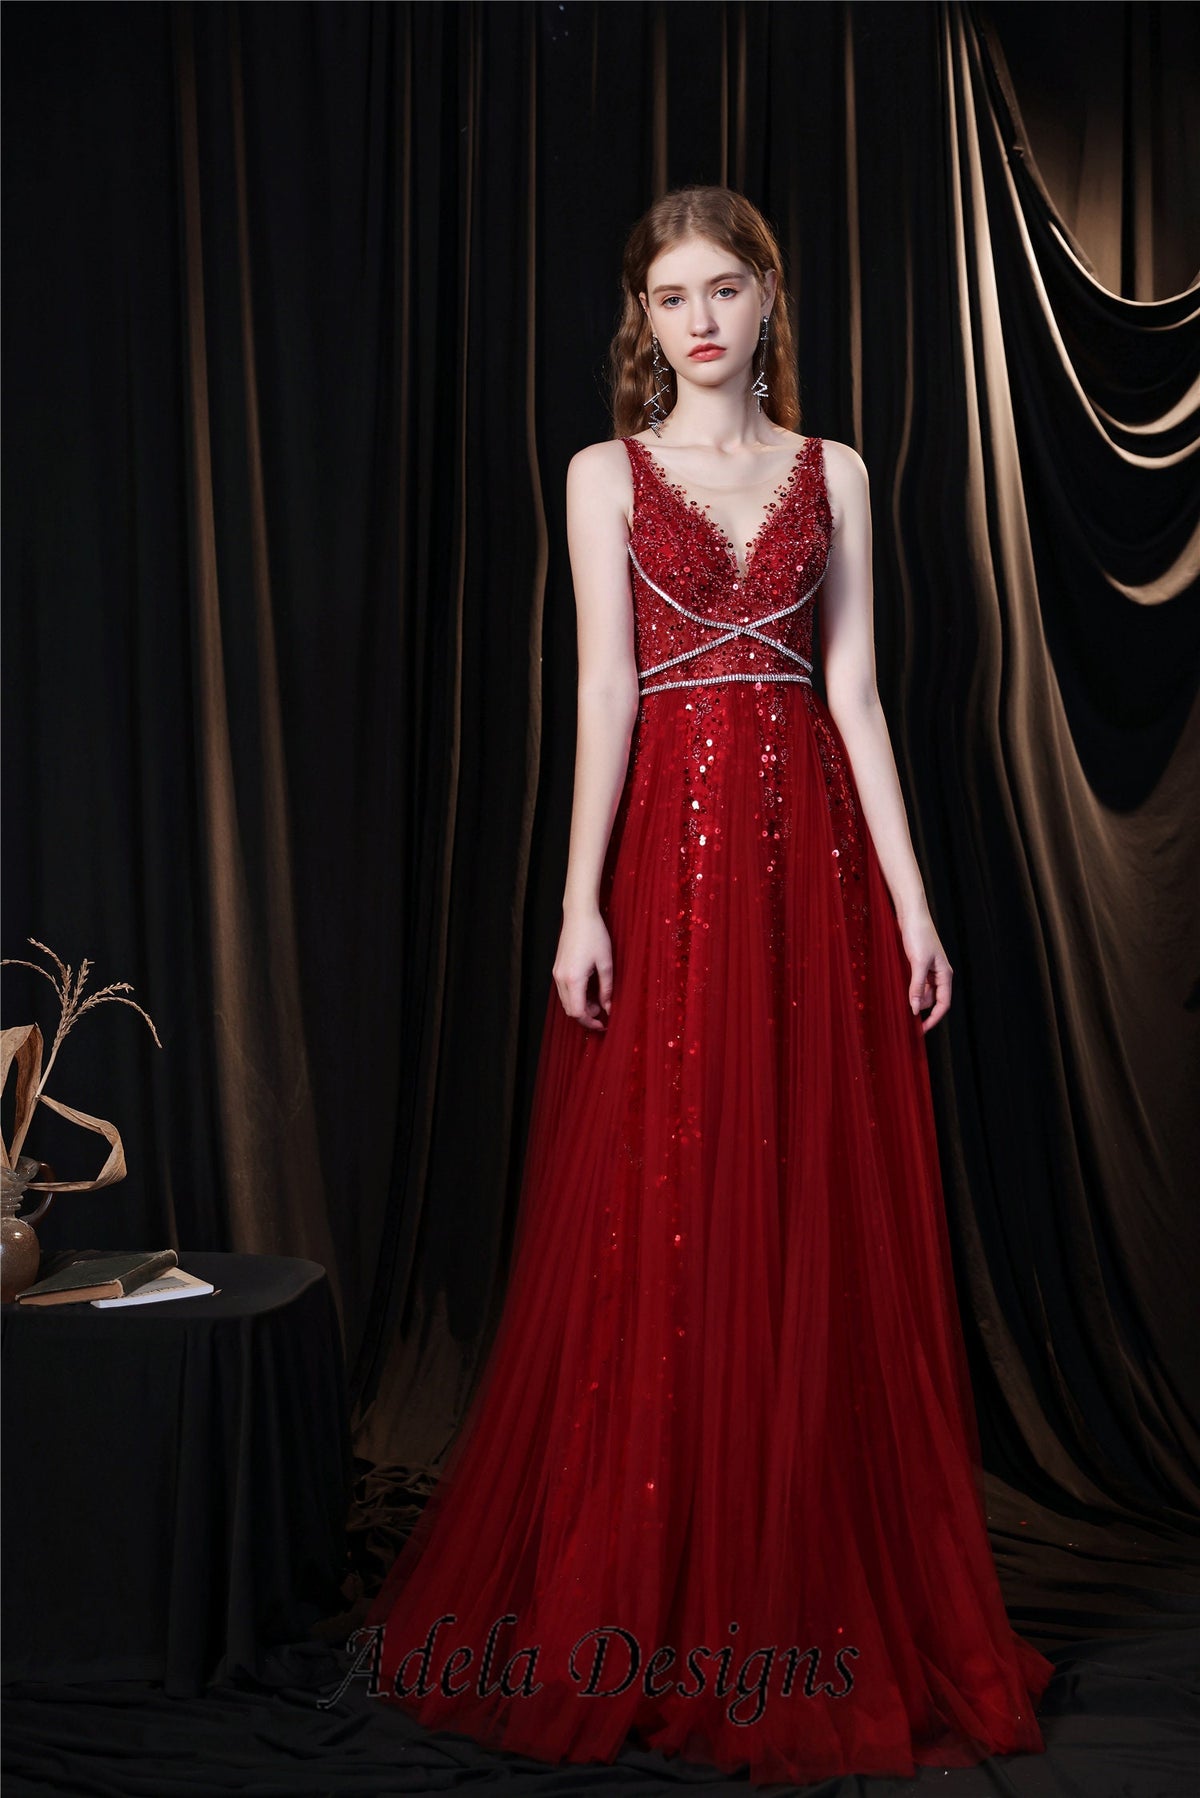 Dark Red Heavily Beading Tulle Aline Sleeveless V Neck Open Back Wedding Dress Bridal Gown Formal with Cape Feathers Sample In Stock